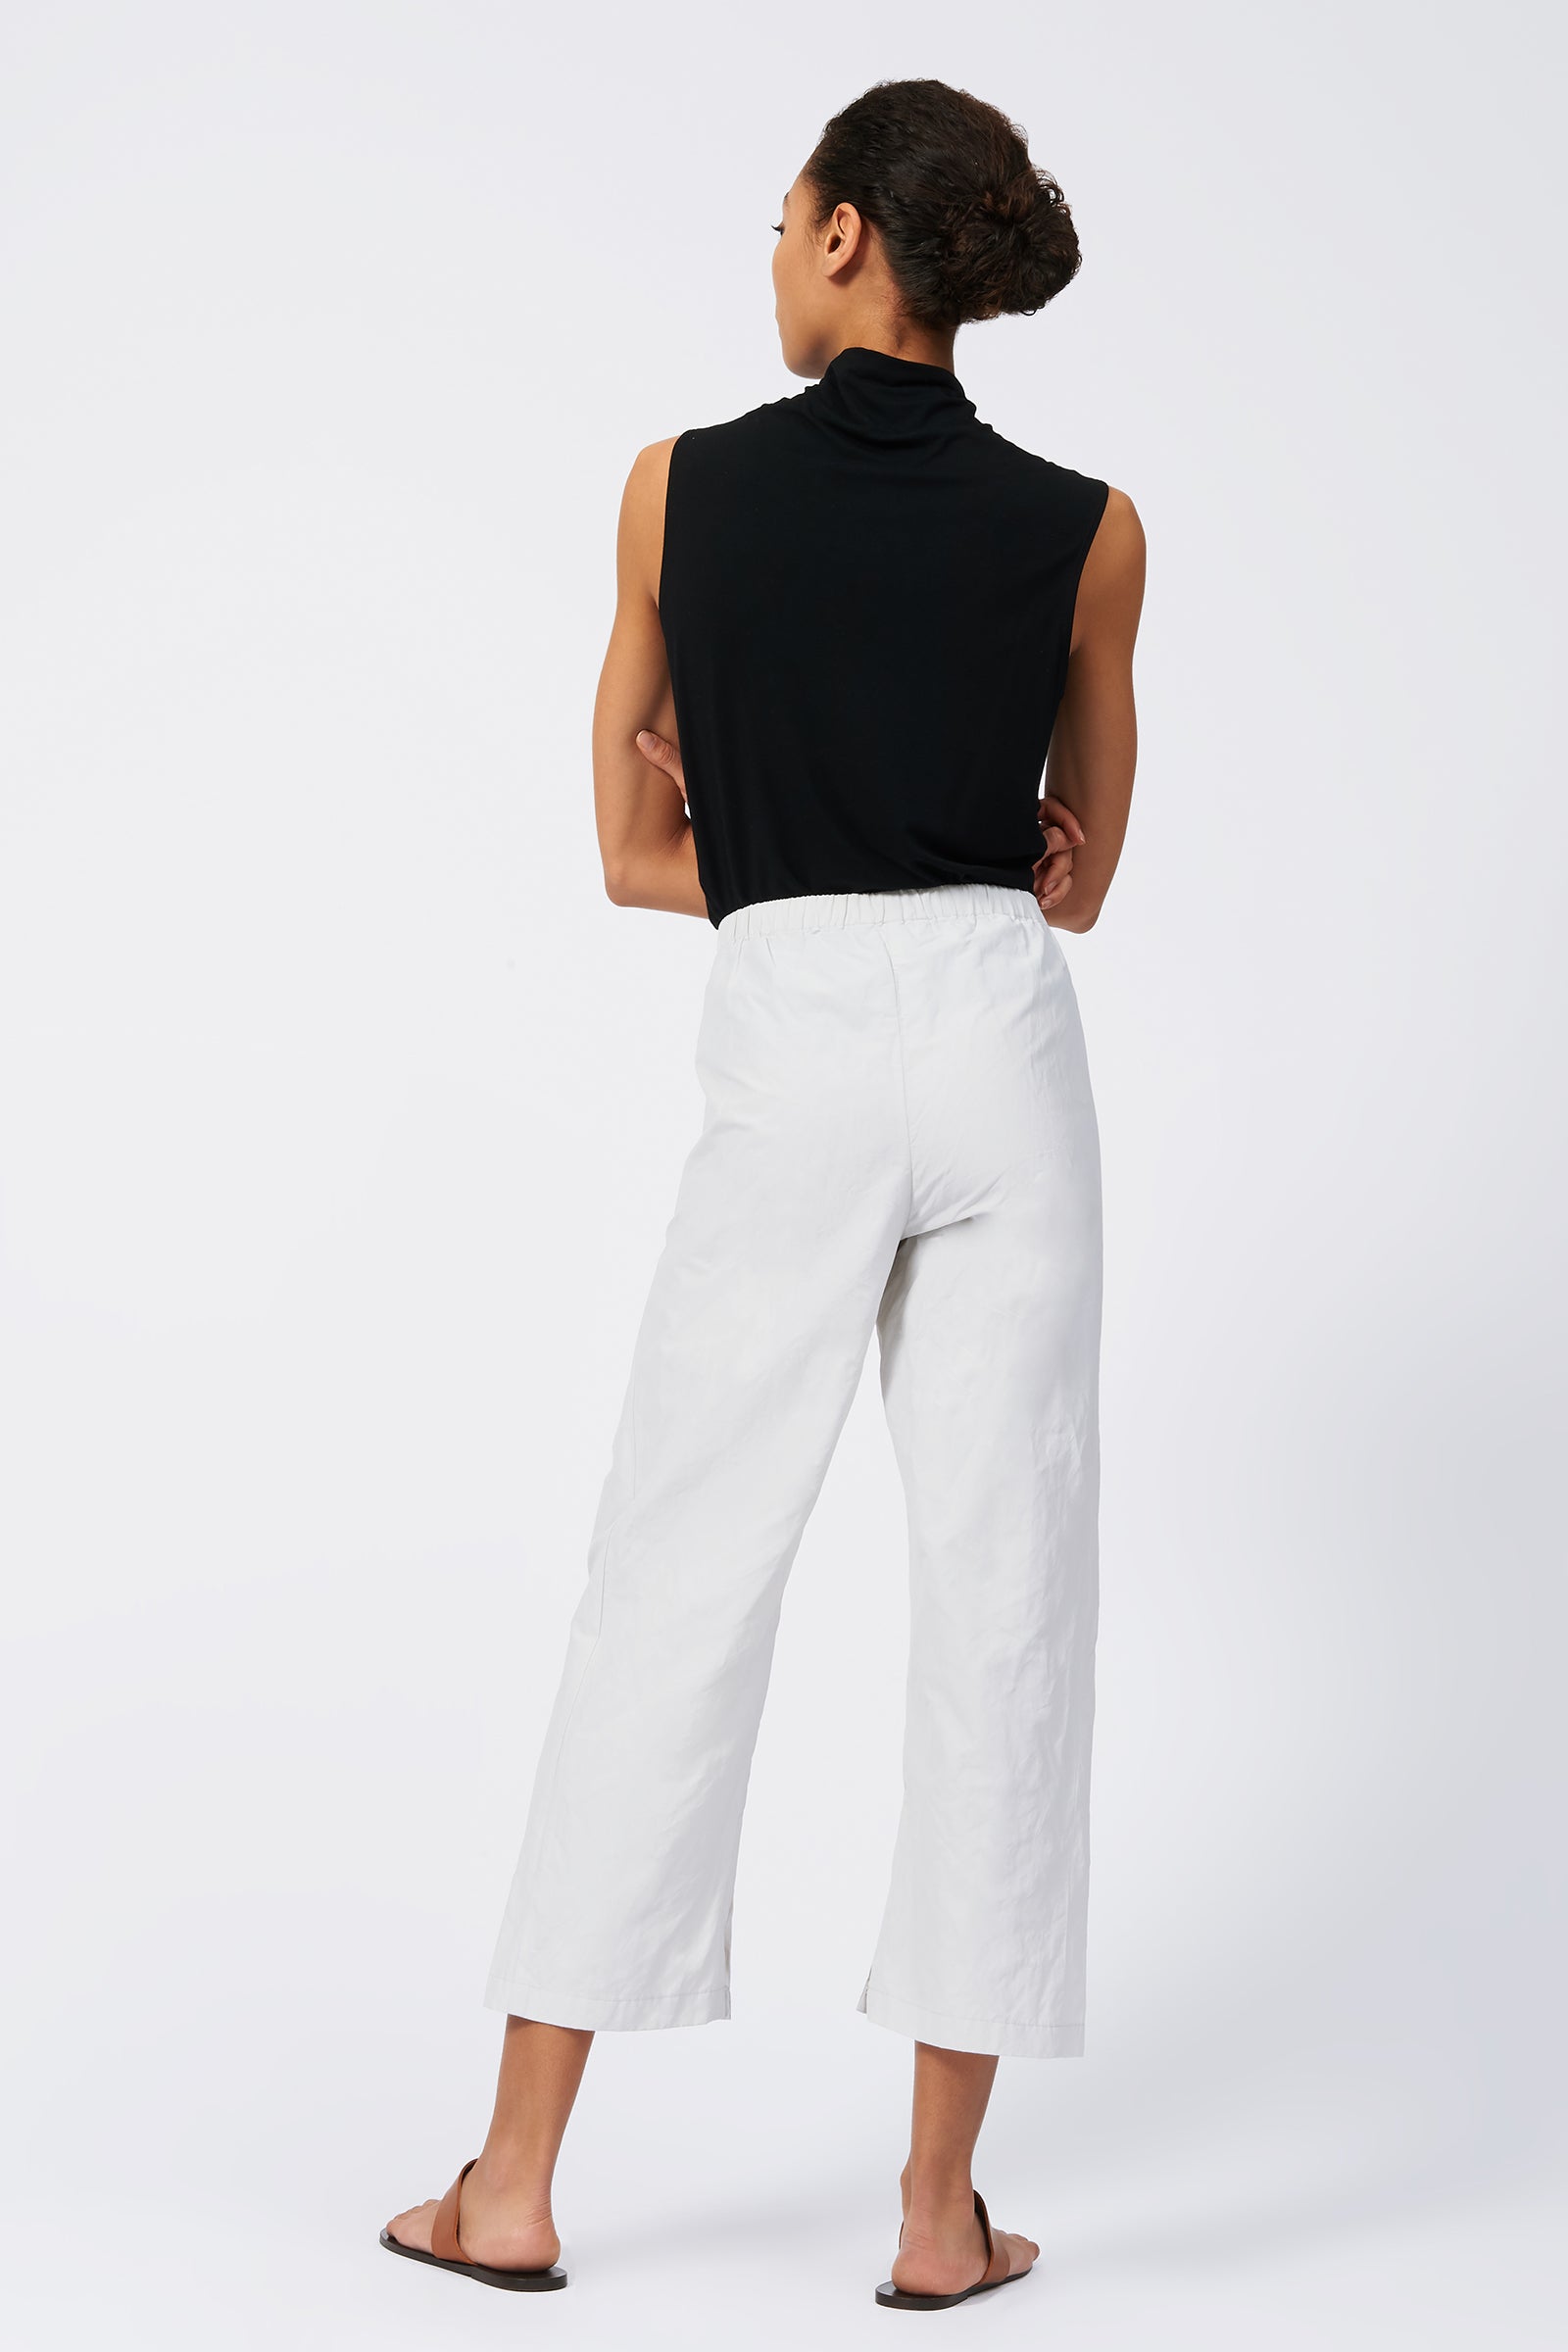 Ginna Box Pleat Shirt in White Stretch Made From a Cotton Blend – KAL RIEMAN